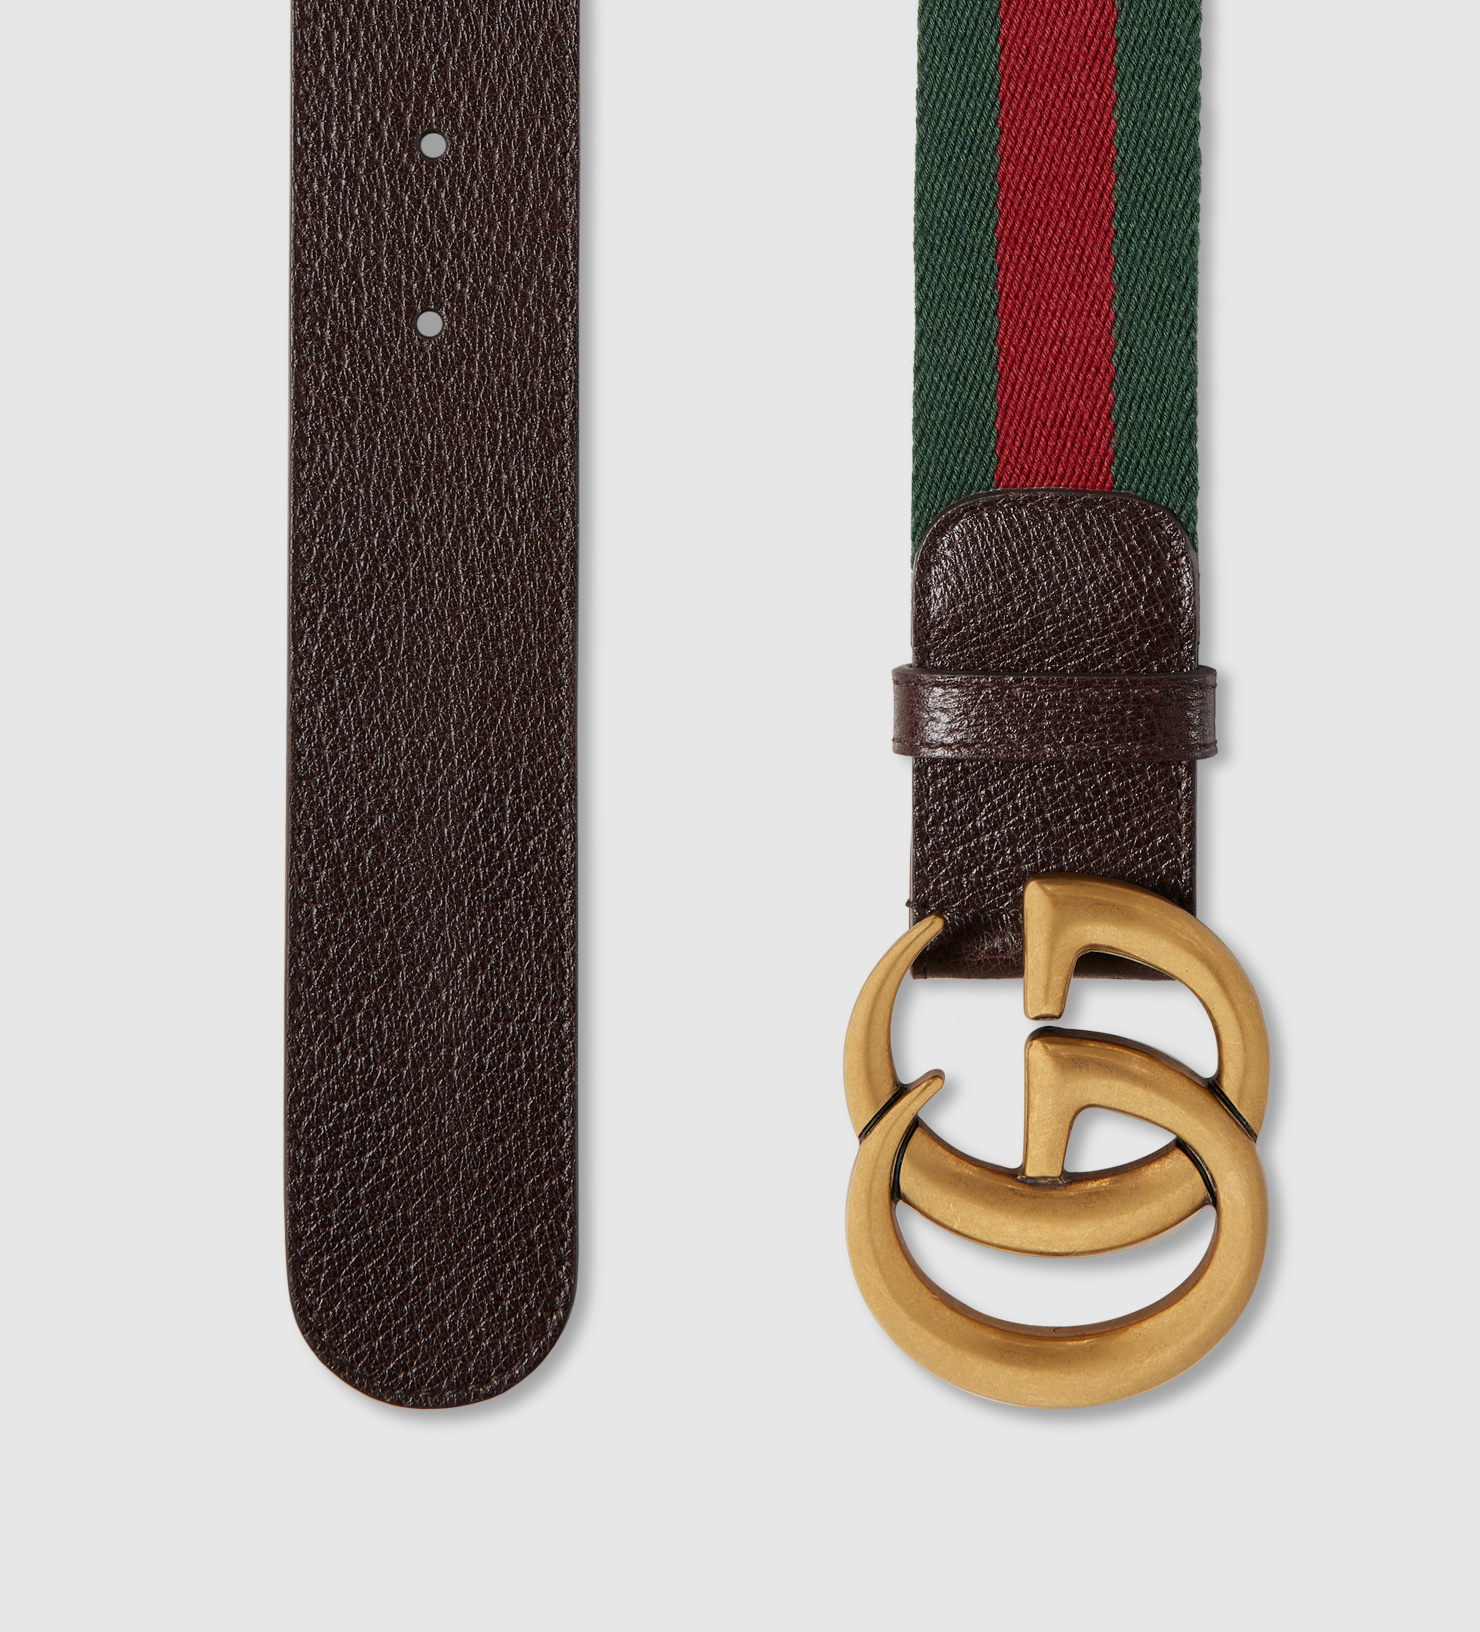 Lyst - Gucci Web Belt With Double G Buckle in Metallic